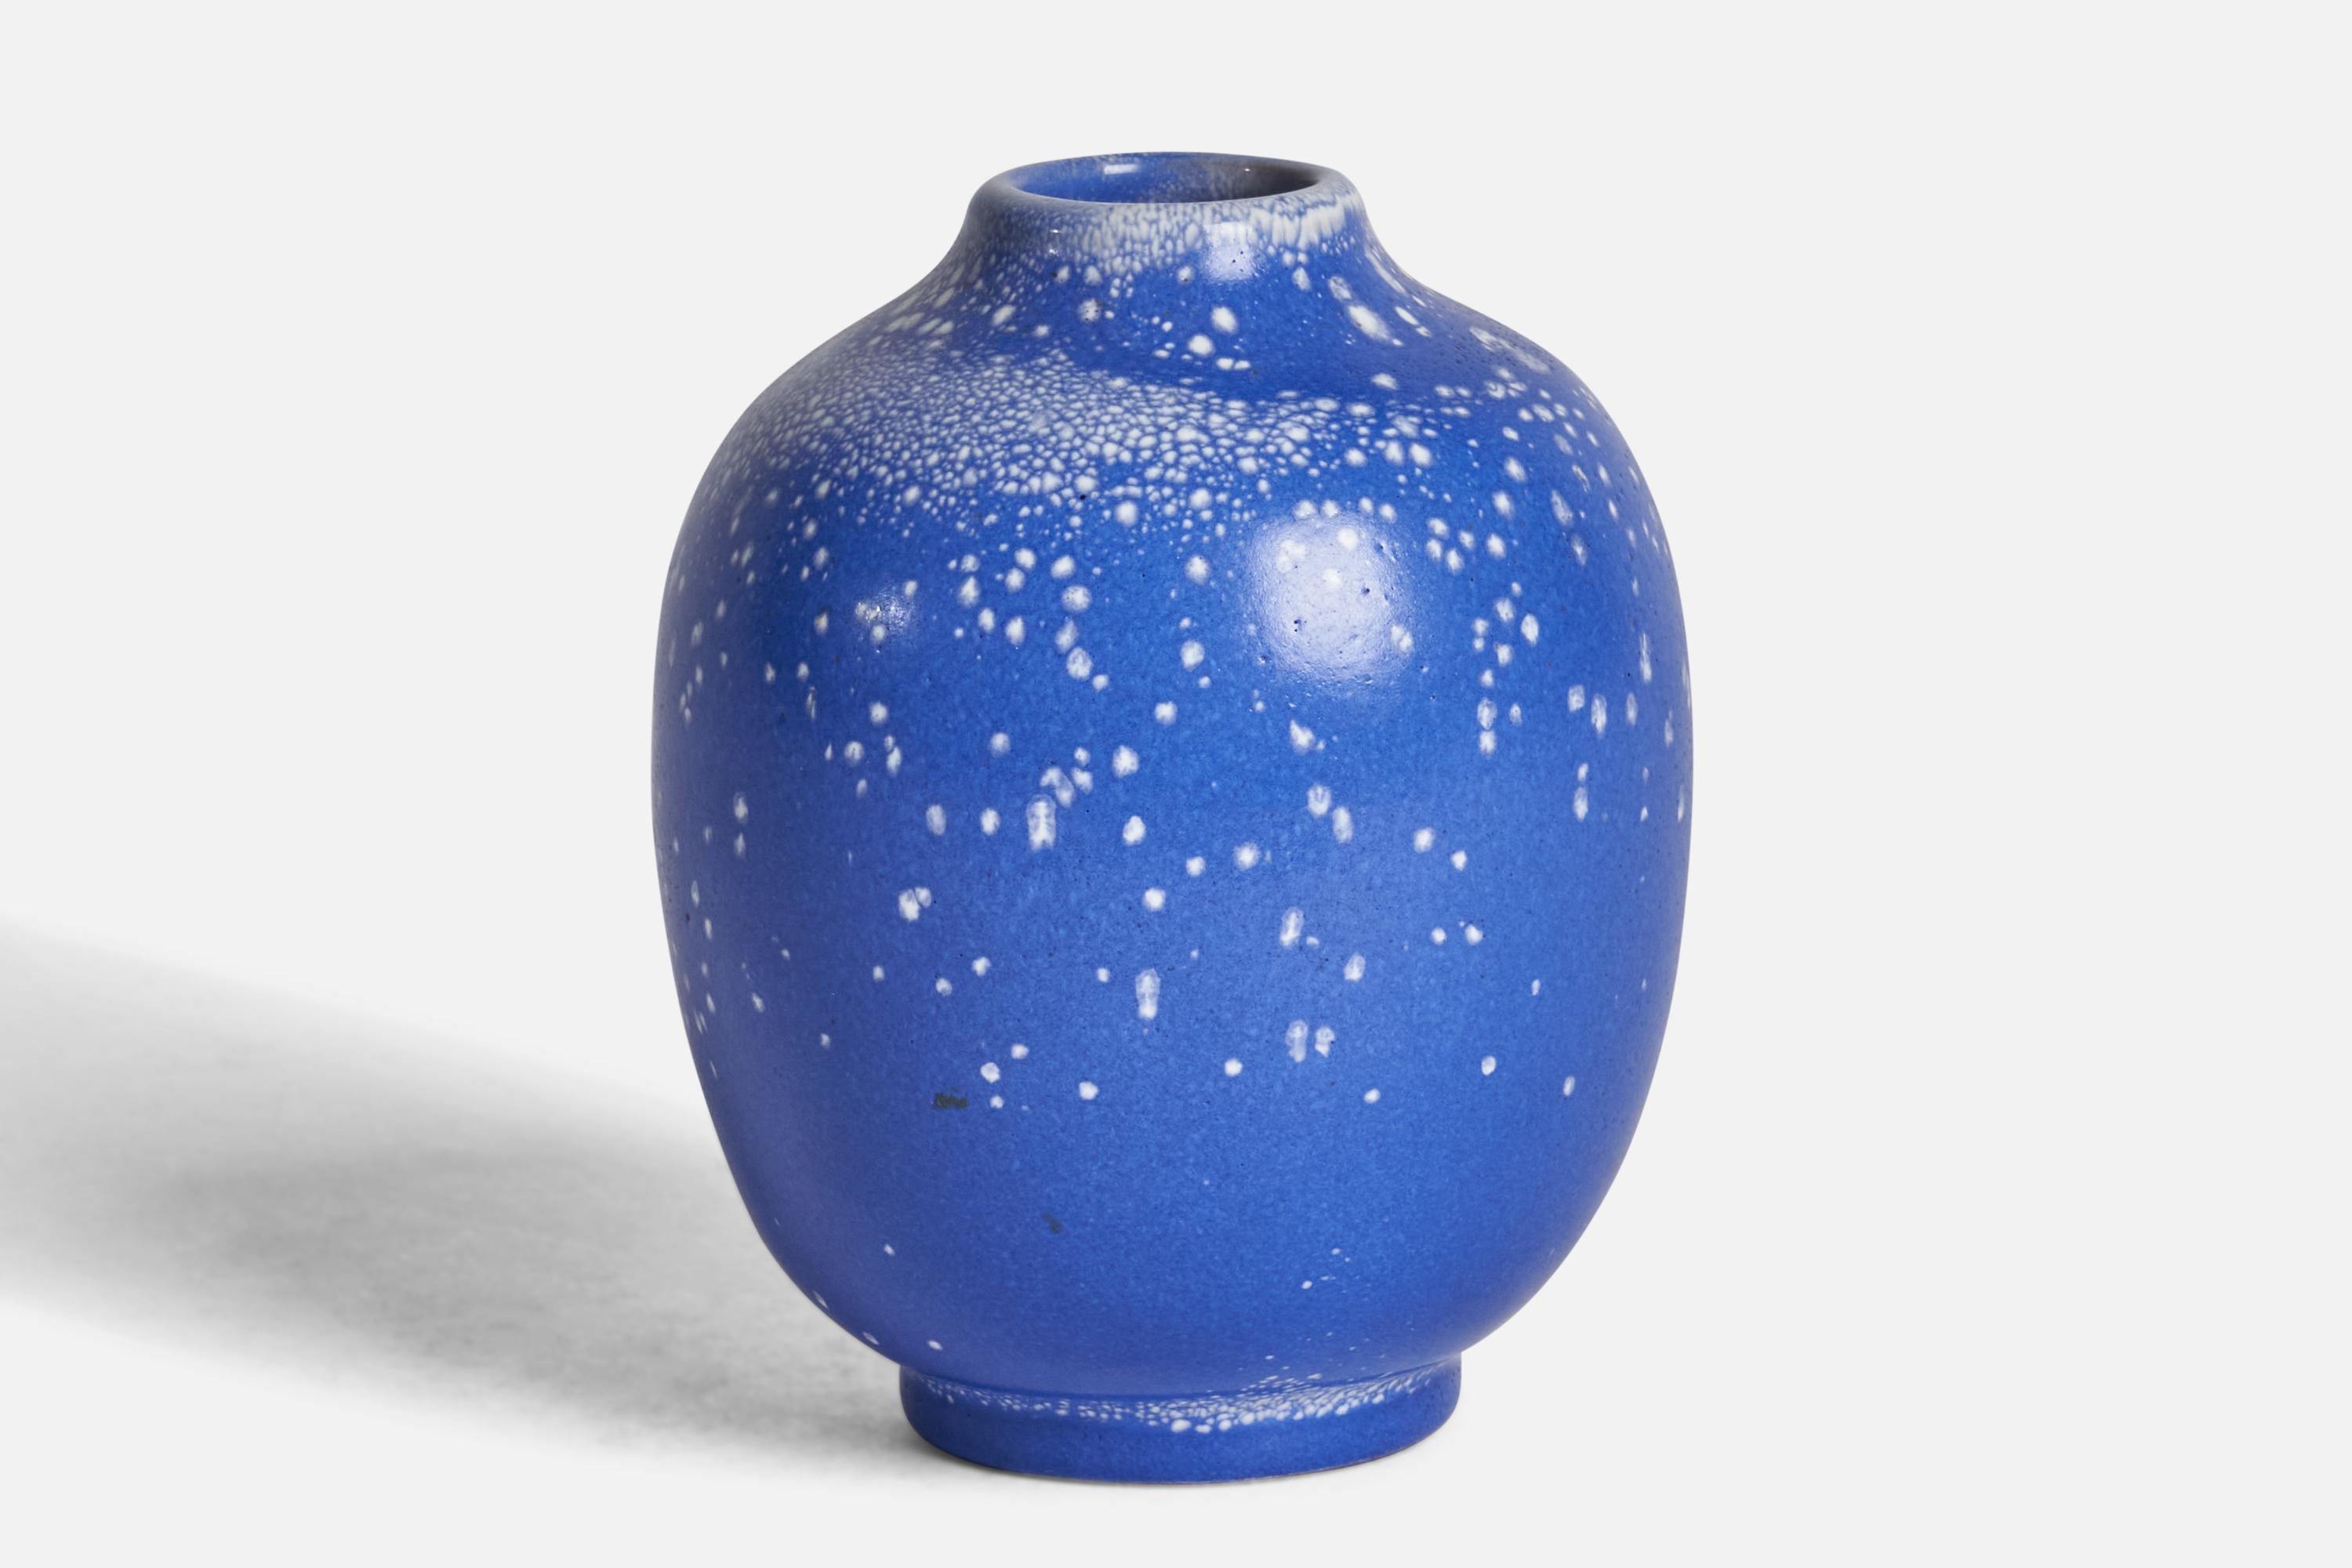 A blue and white-glazed earthenware vase designed by Anna-Lisa Thomson and produced by Upsala Ekeby, Sweden, 1930s.